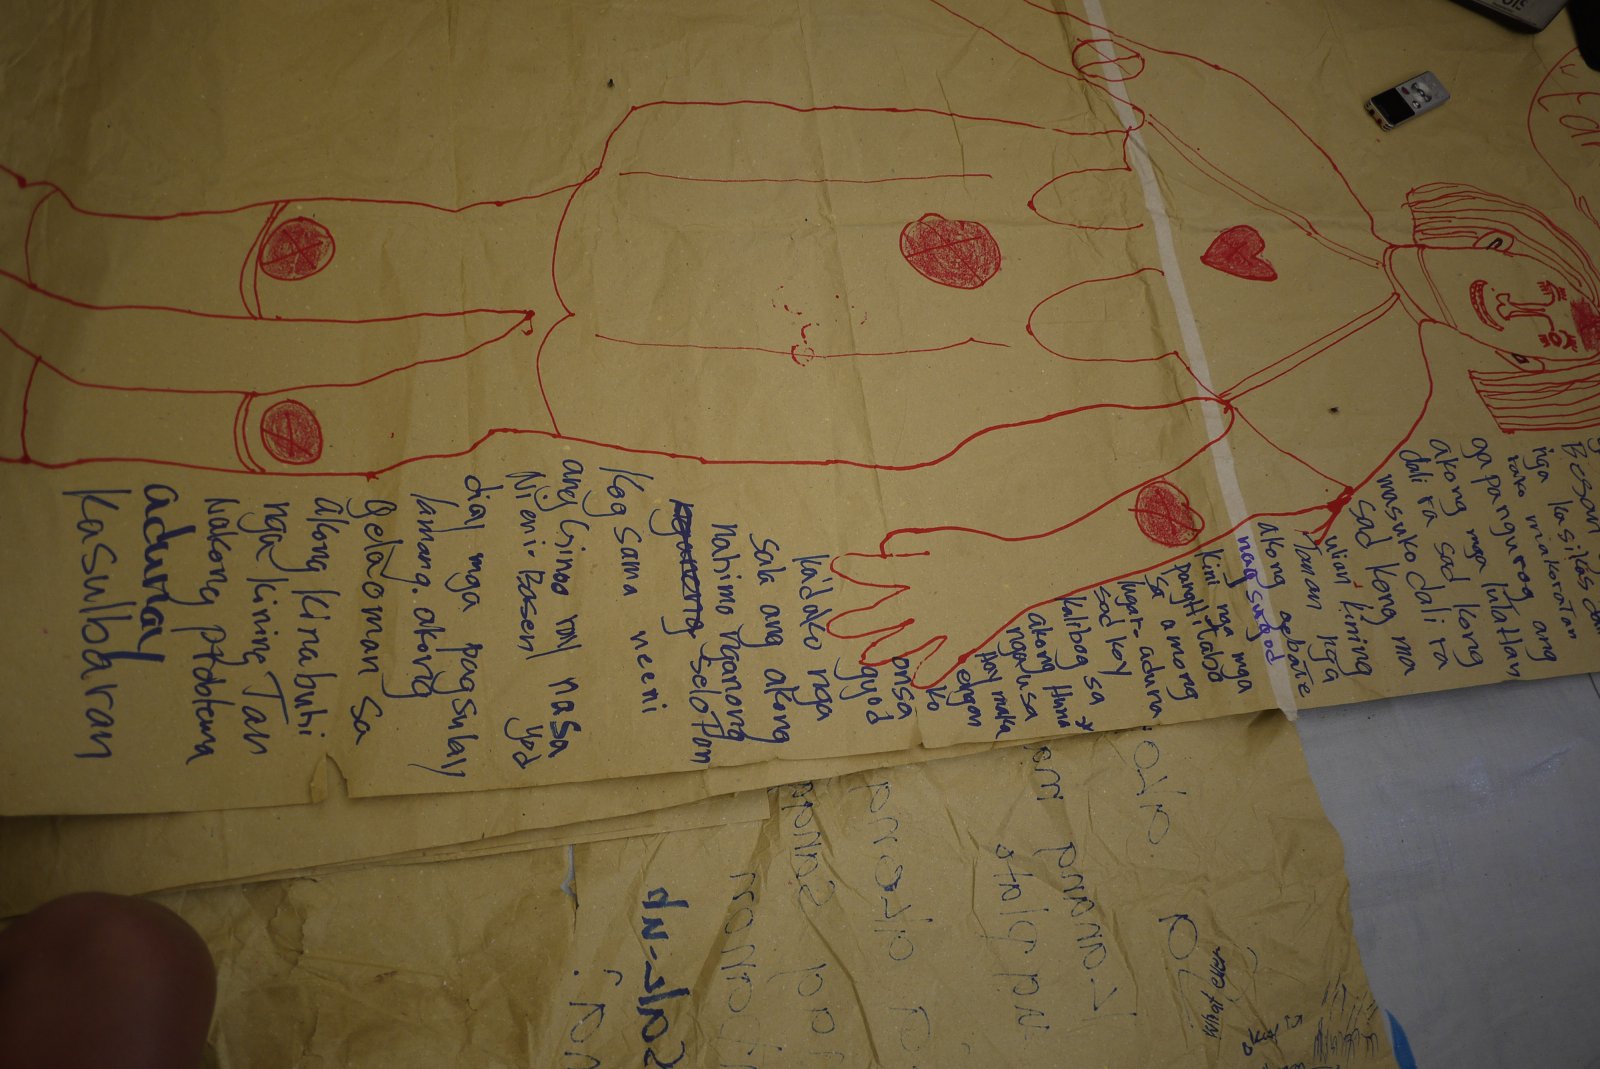 A body map is festooned with red circles marking the painful parts of the body. Photo courtesy of MIILS